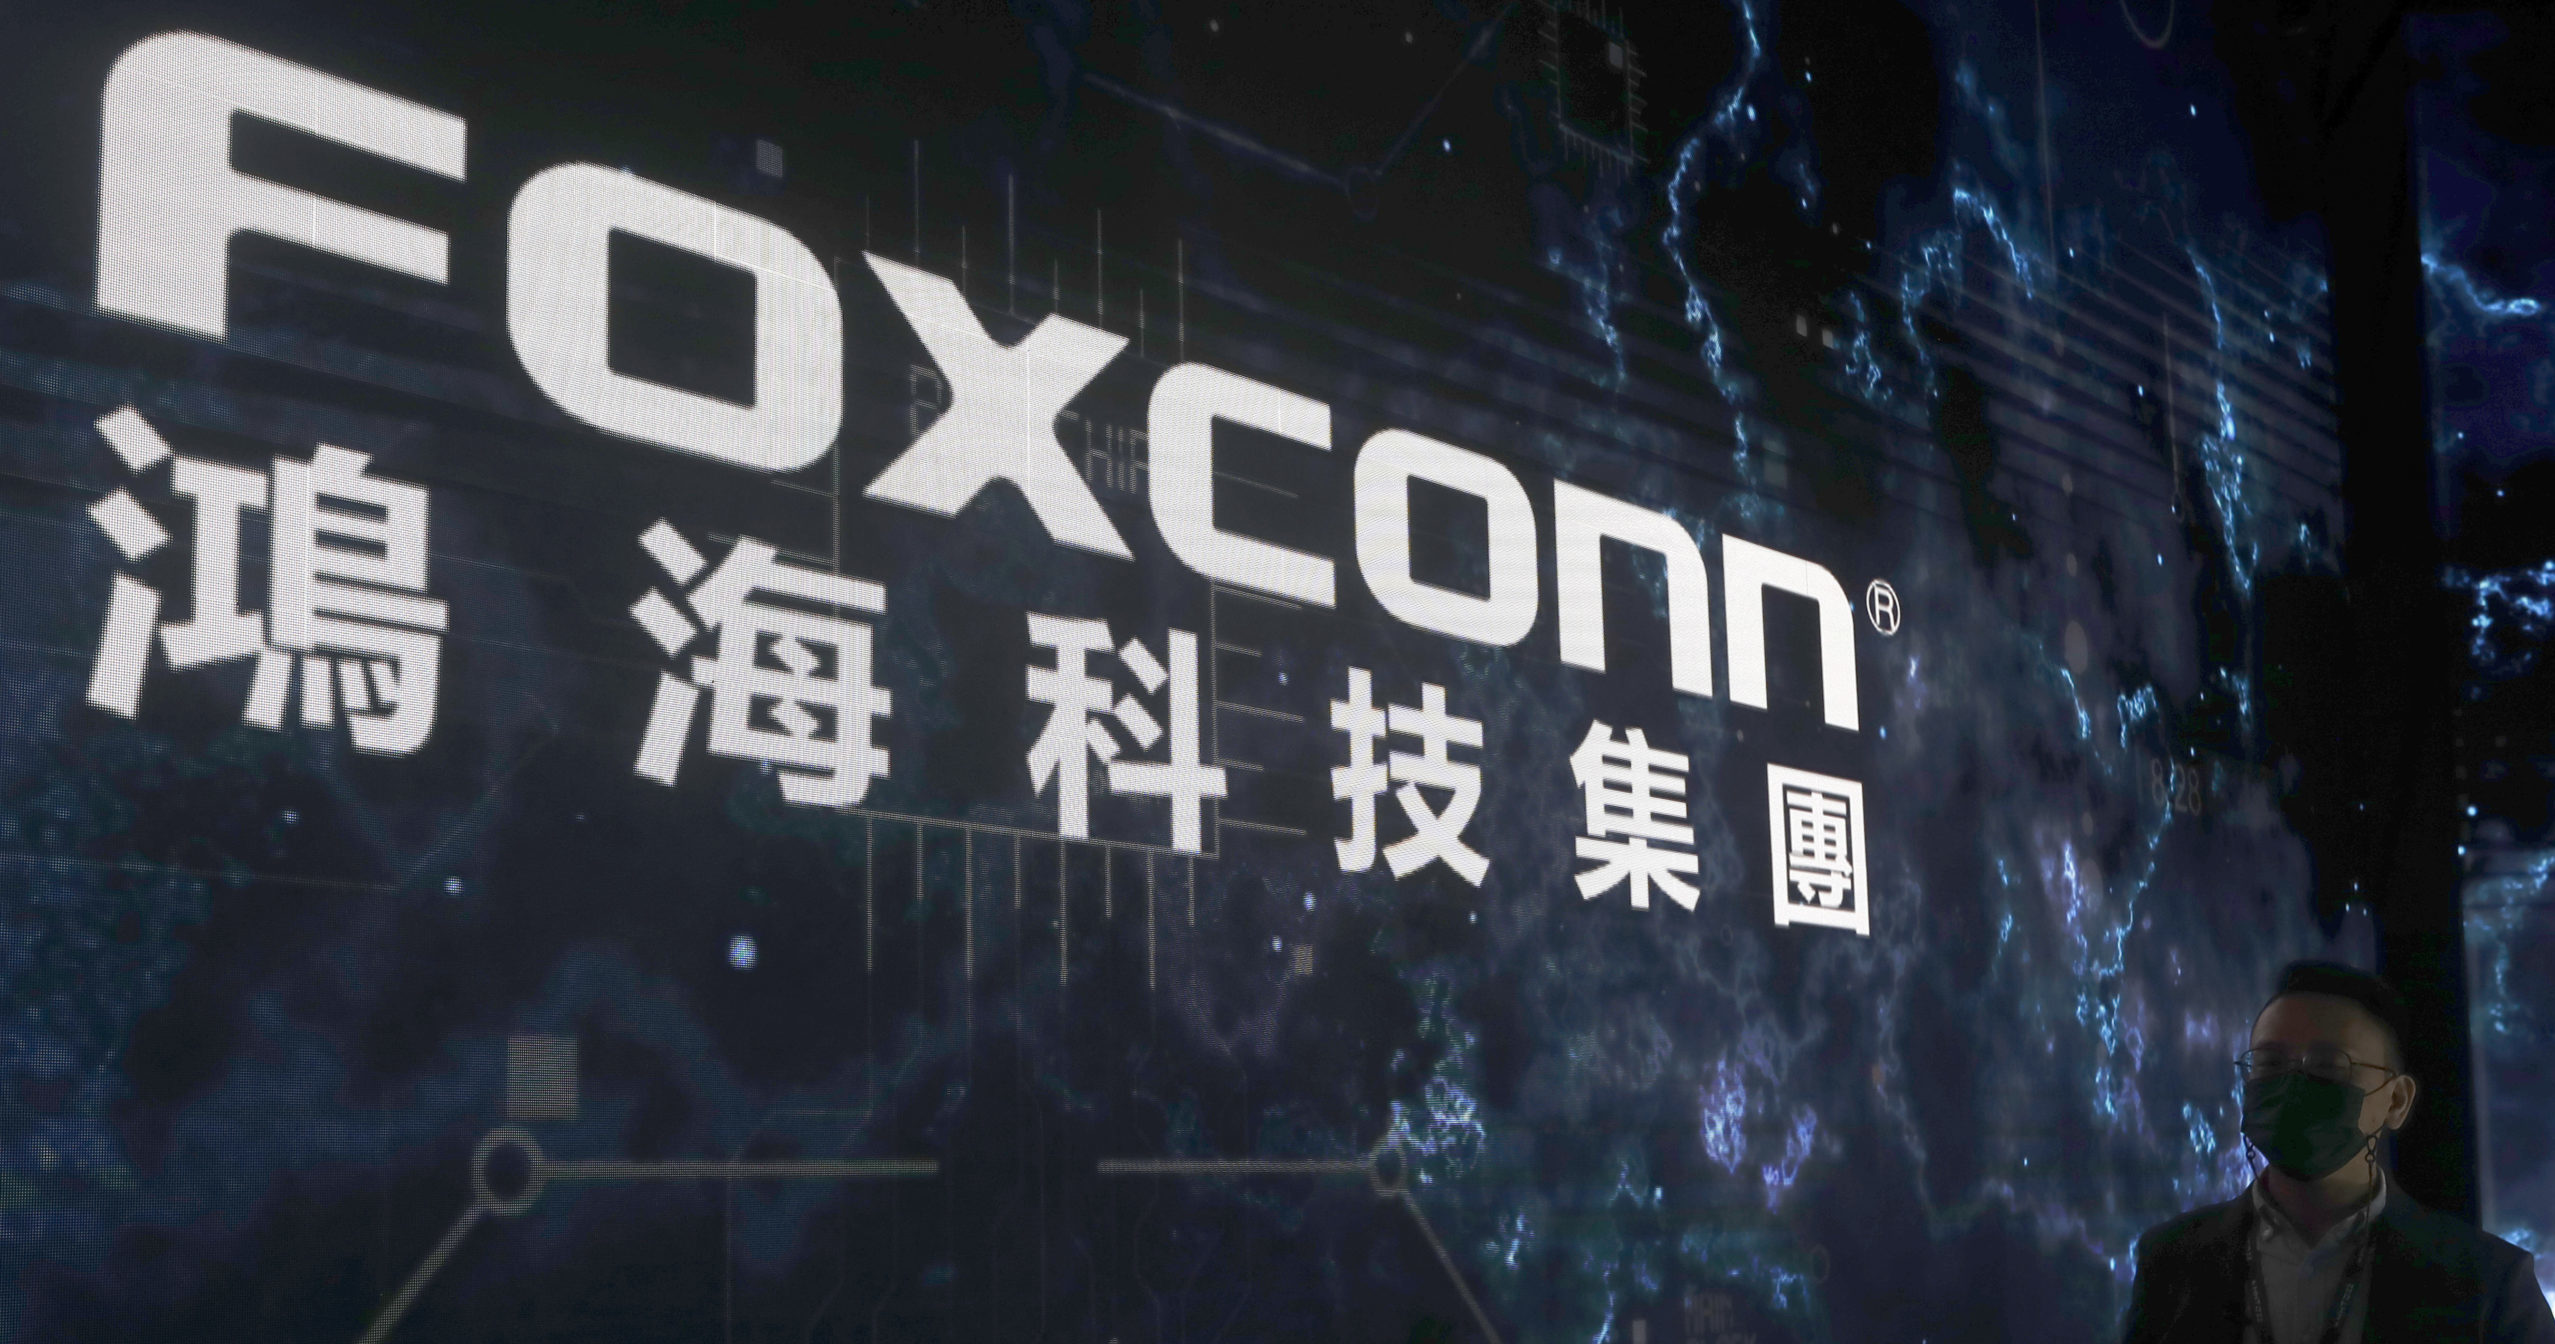 The Foxconn logo is seen at the Nangang Exhibition Center in Taipei, Taiwan. Foxconn, a Fortune 500 company known globally for making Apple iPhones, was recently subjected to searches by Chinese tax authorities, state media reported Oct. 22, 2023.